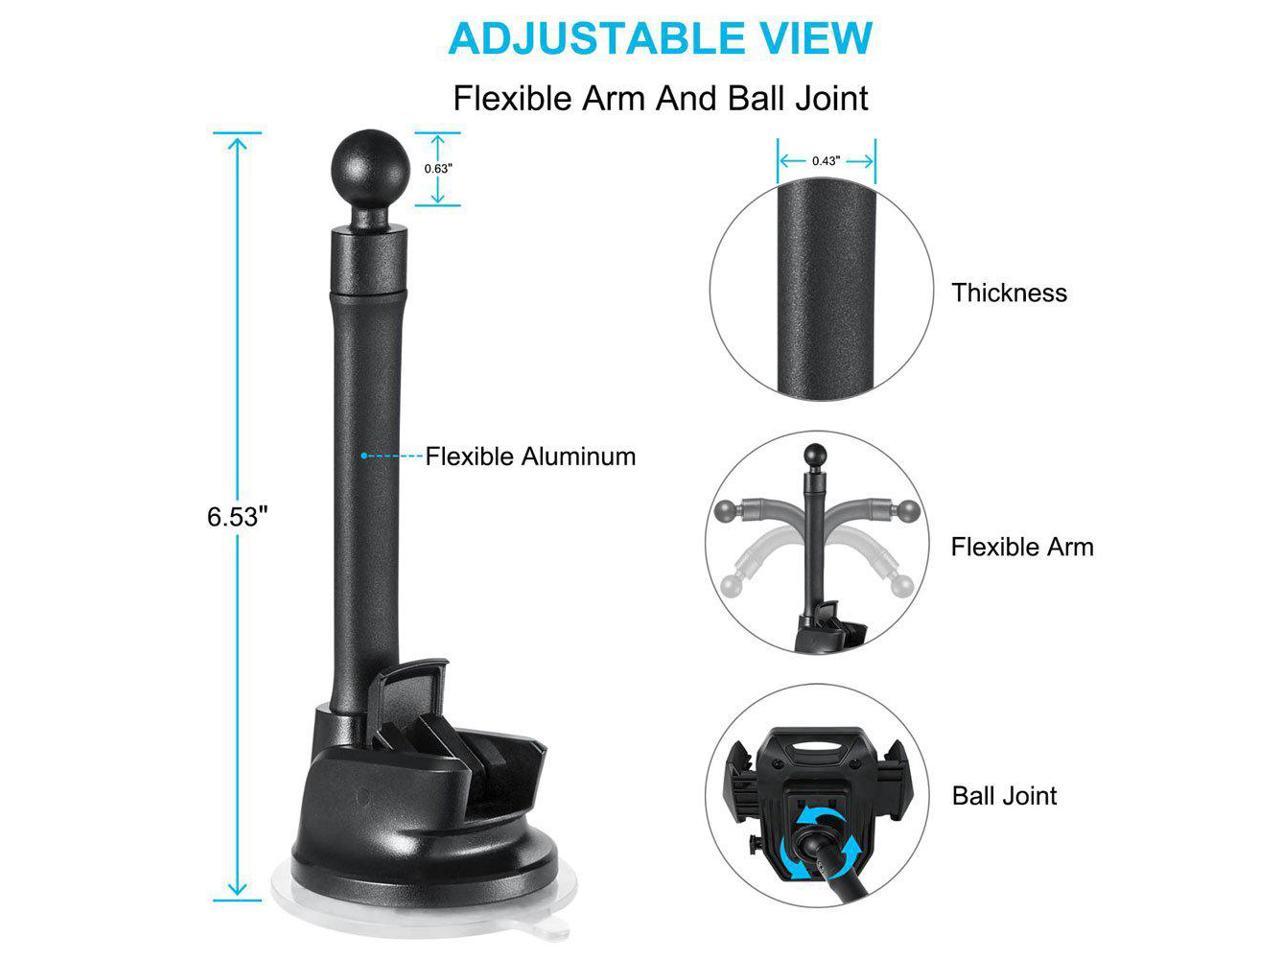 Ultimate Flexible Arm Magnetic Dash Mount Windshield Phone Holder w/ Strong Sticky Suction Cup for IPhone X 8 7 Plus 6S Plus Samsung Galaxy S9 S8 S7 Edge Note 5 HTC U12 U11 Sony Xperia Z5 HUAWEI Gendle Technology 4333126642